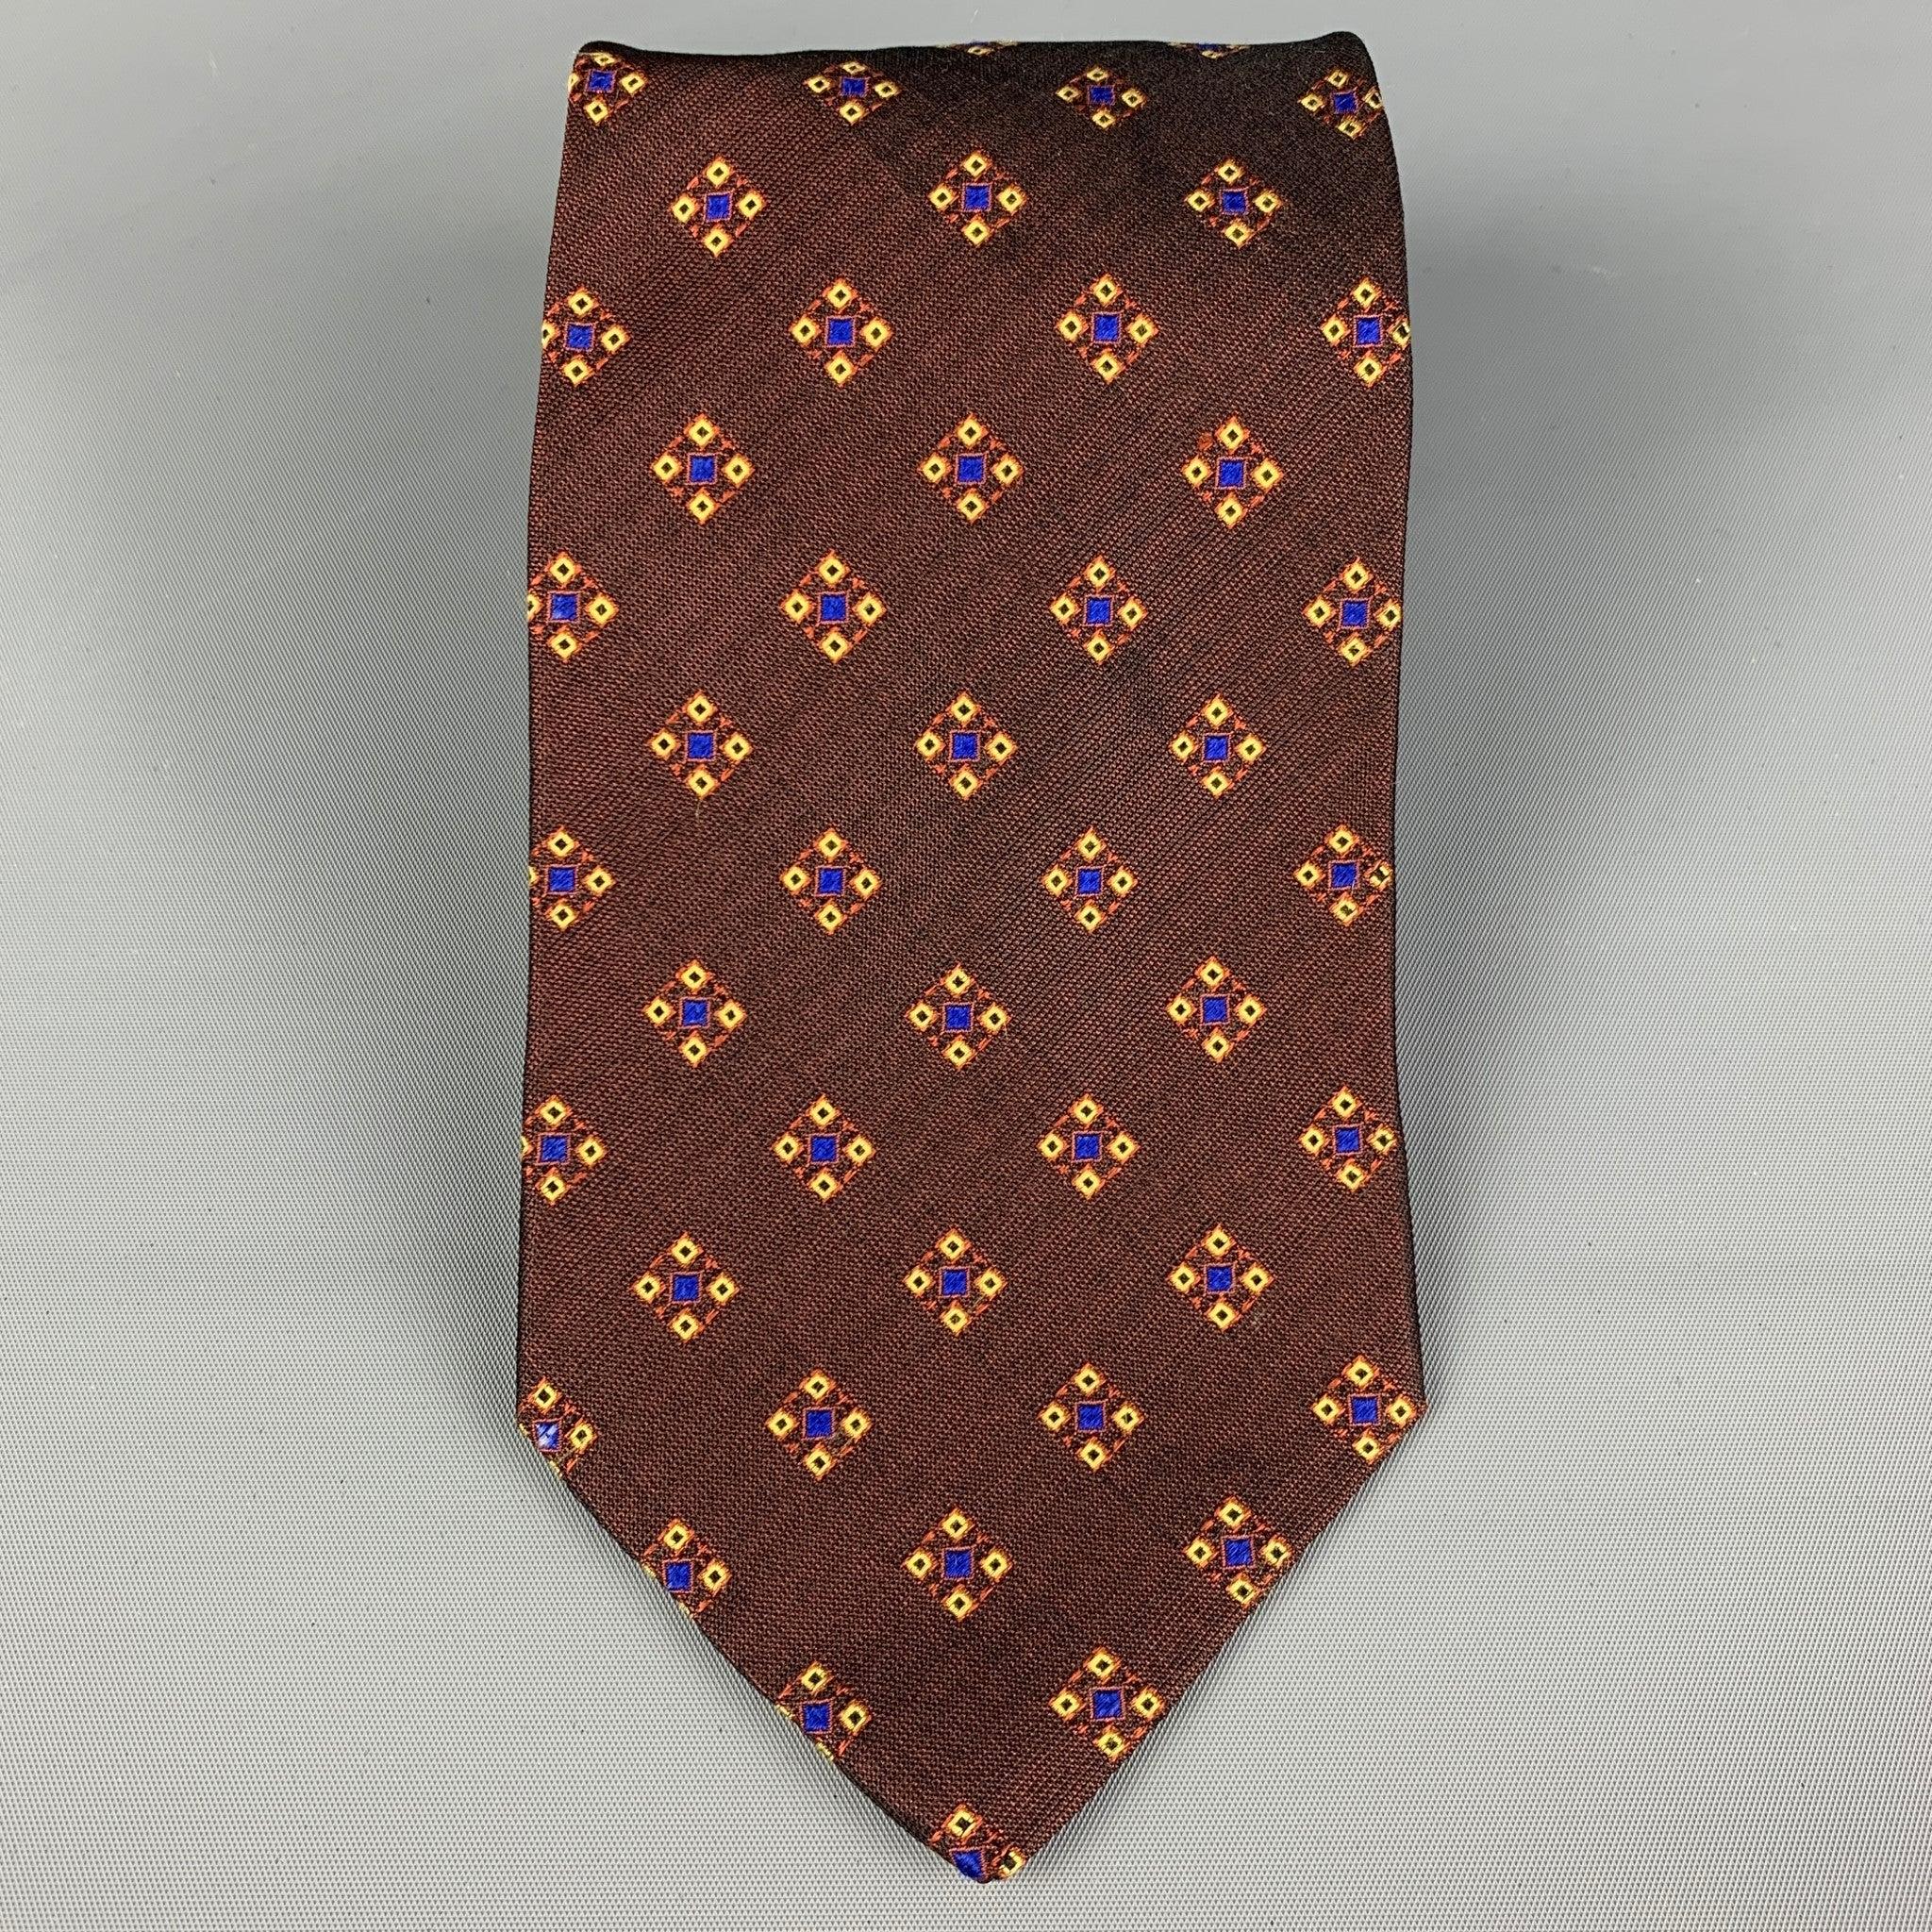 Vintage ROMEO GIGLI
 necktie comes in a burgundy & yellow silk with a all over abstract print. Made in Italy. Very Good Pre-Owned Condition.Width: 3.75 inches 
  
  
  
 Sui Generis Reference: 112523
 Category: Tie
 More Details
  
 Brand: ROMEO